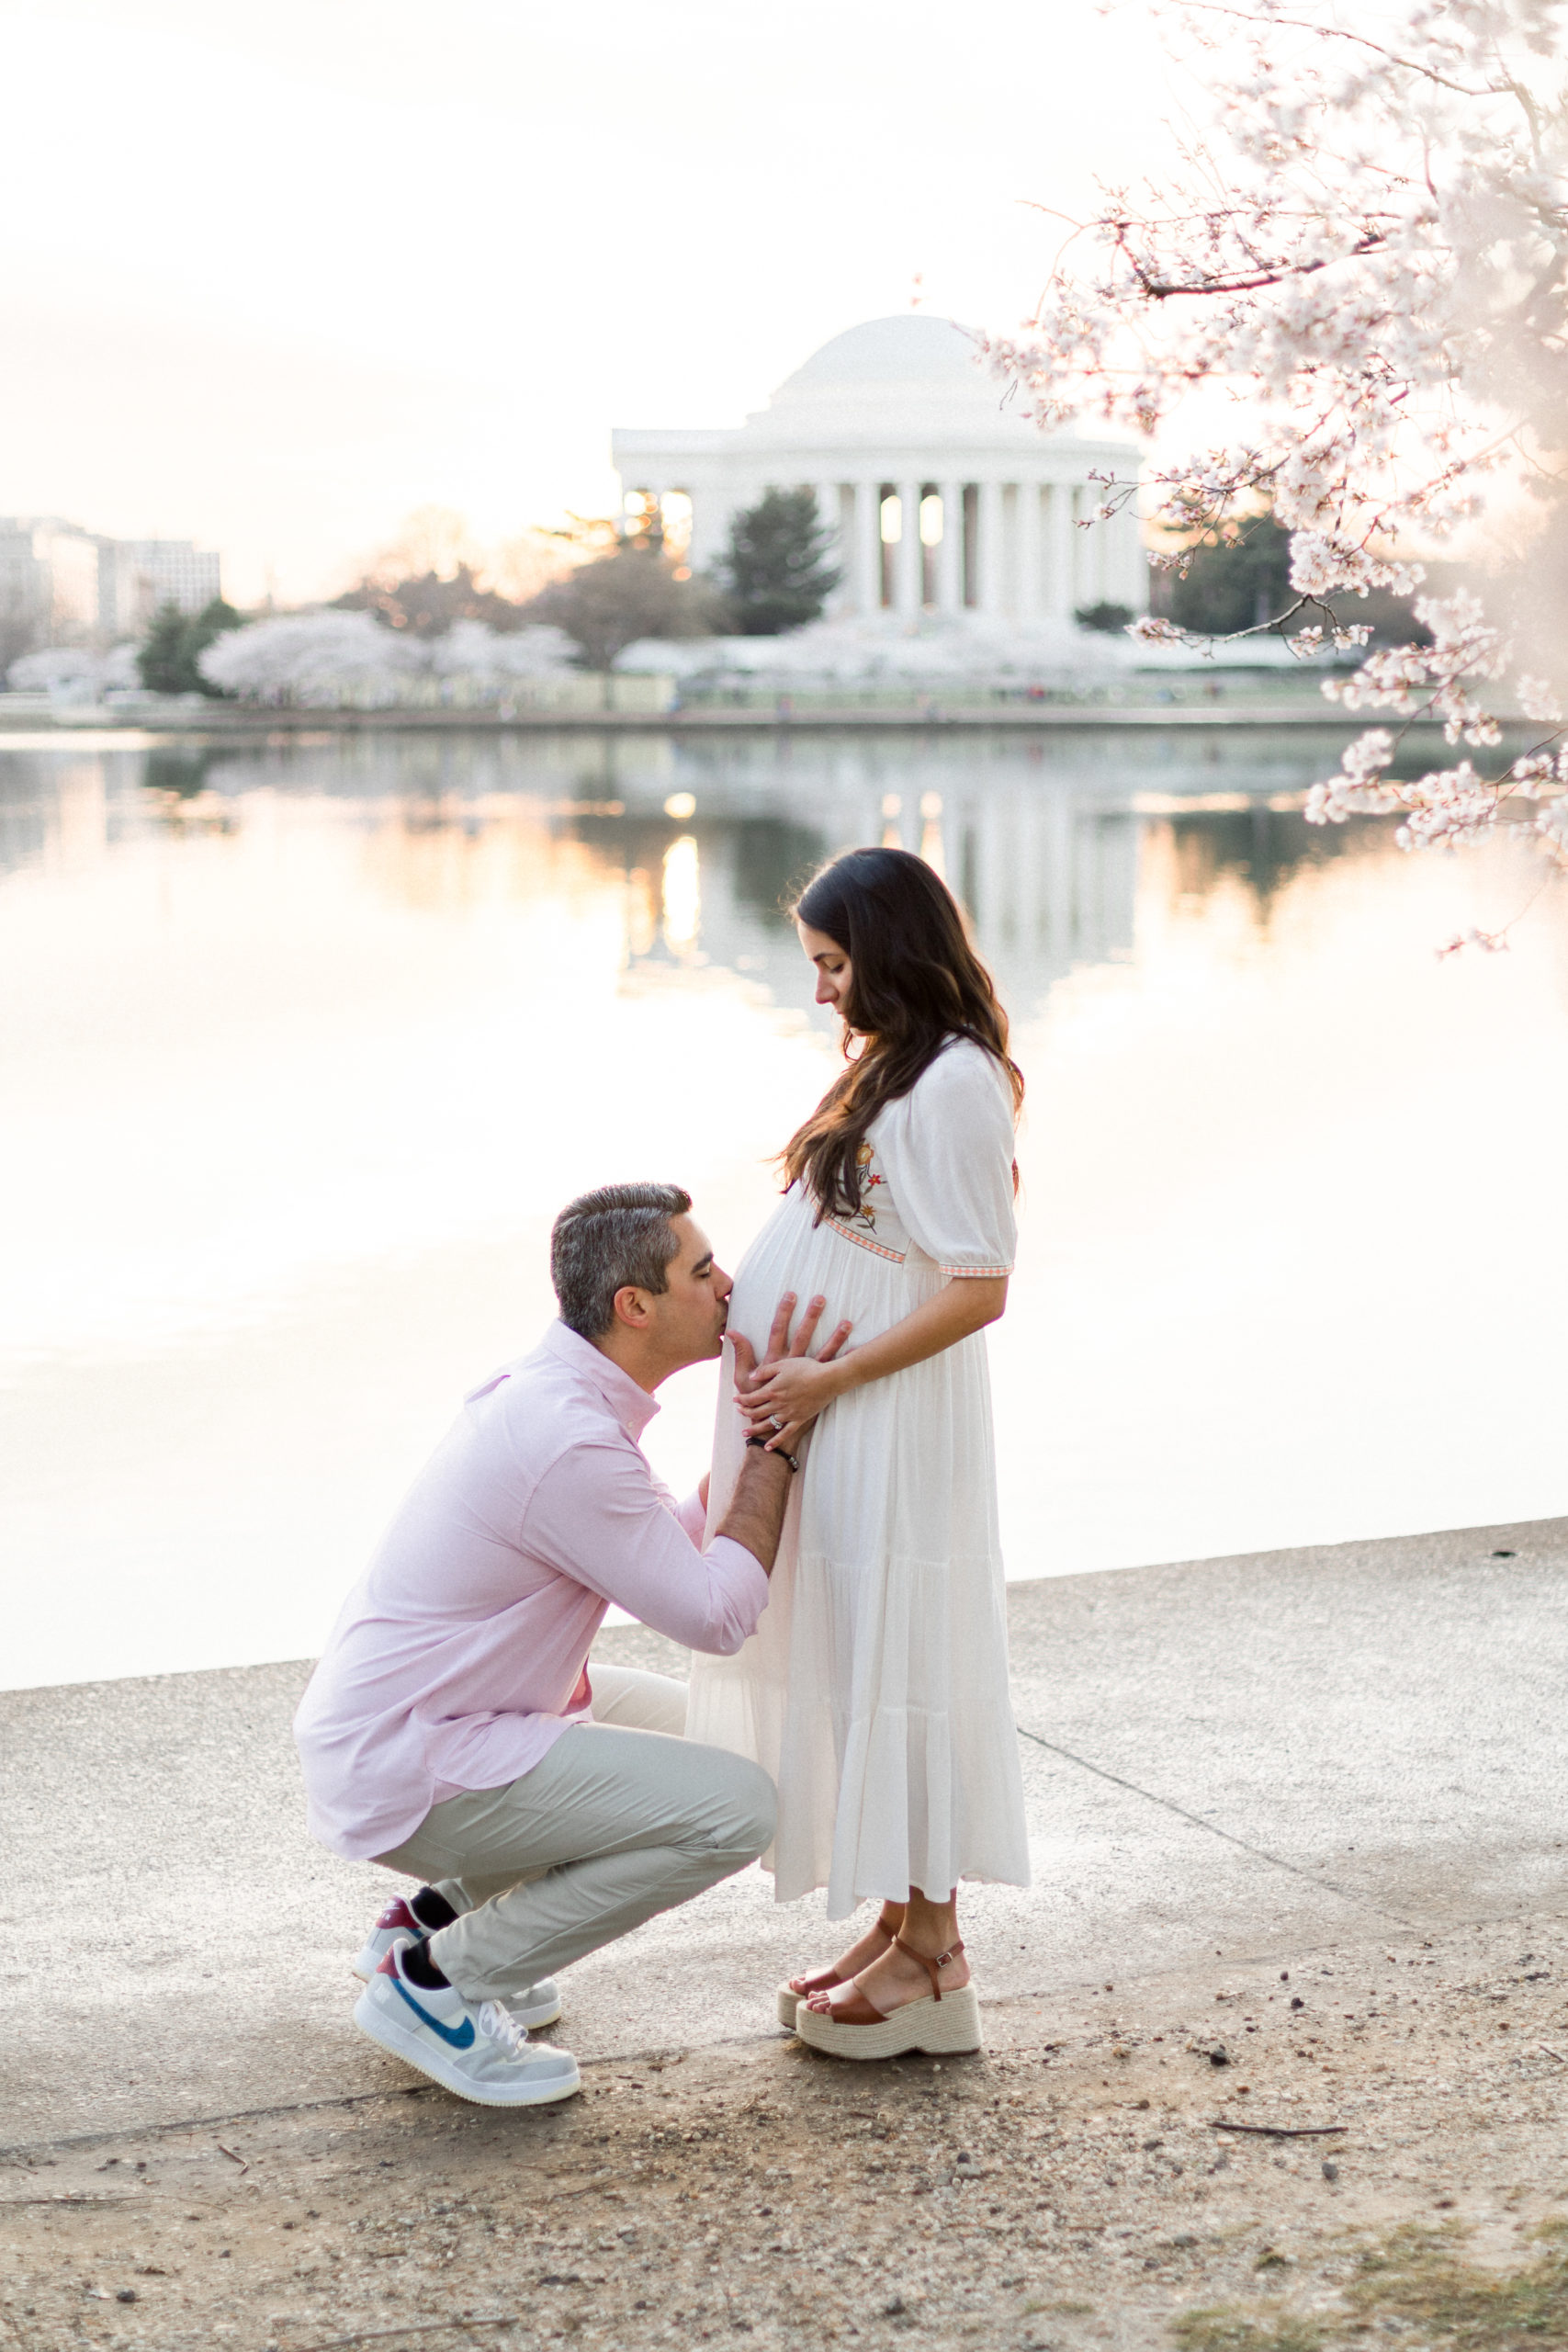 Maternity Couple PhotoShoot Ideas That Never Get Old